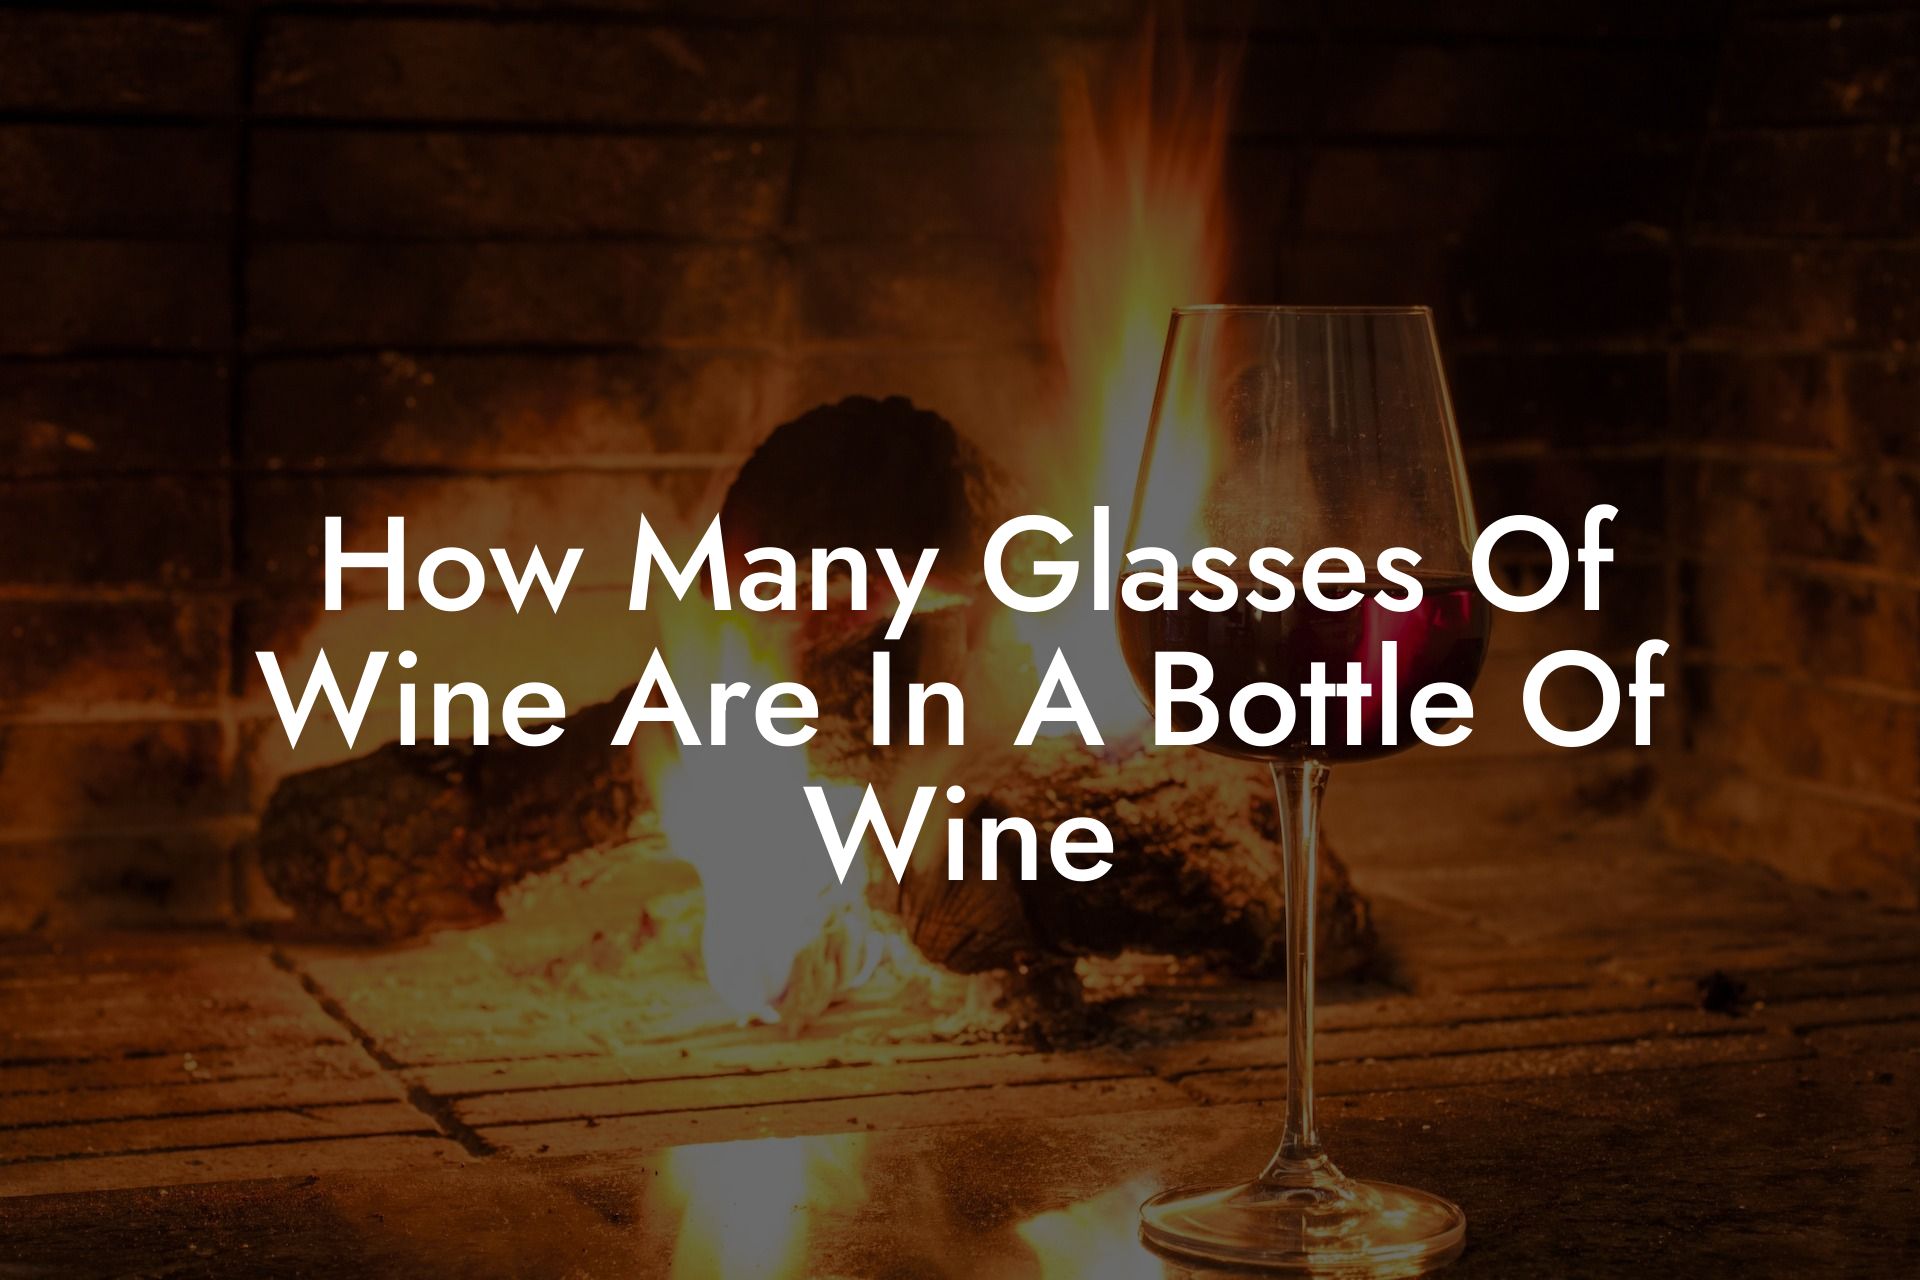 How Many Glasses Of Wine Are In A Bottle Of Wine